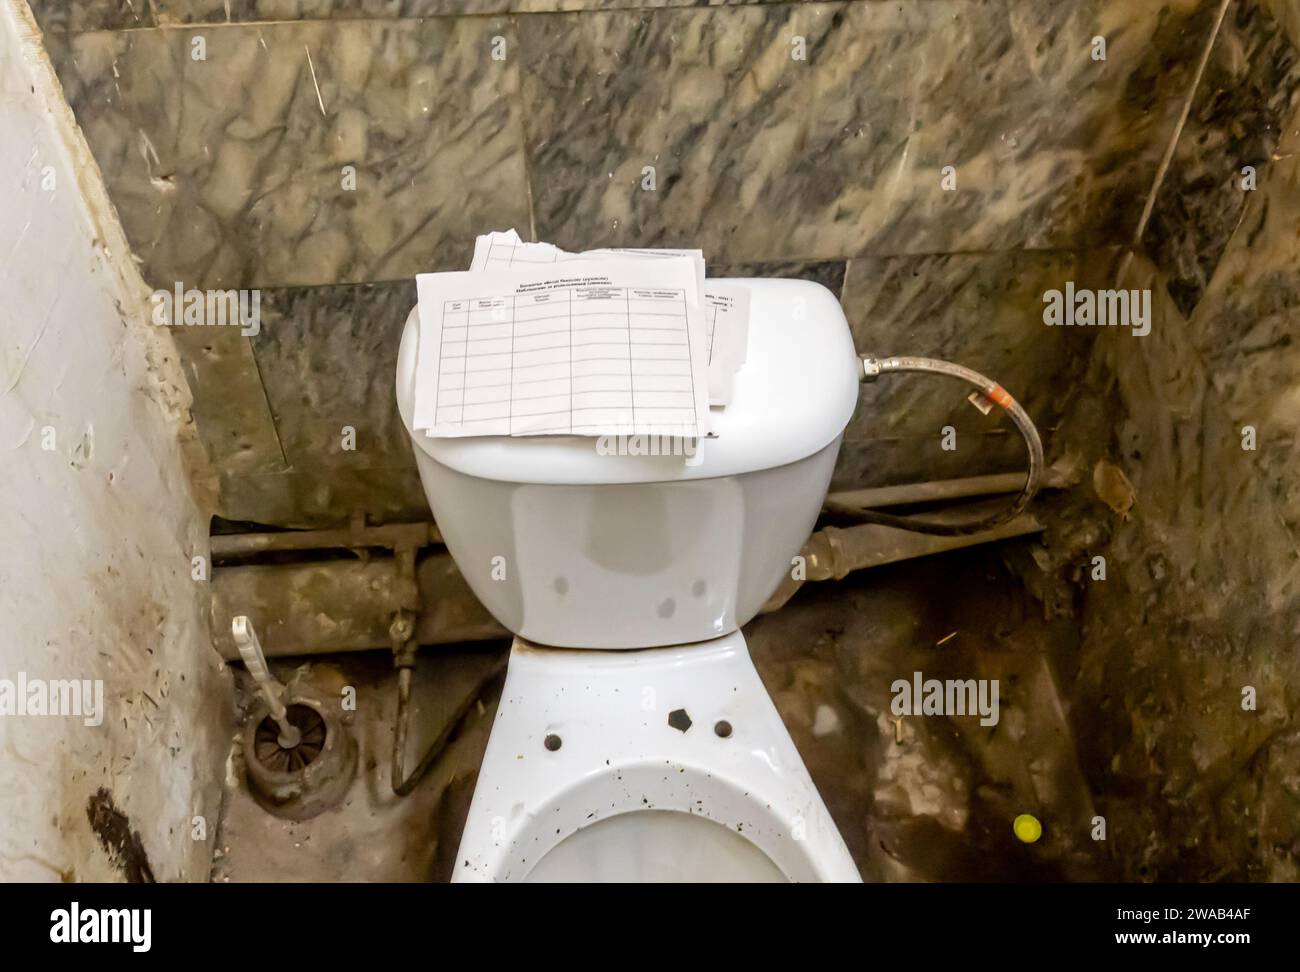 Bathroom toilet arrangement typical for public restrooms in the Soviet time, with a torn paper as toilet paper Stock Photo